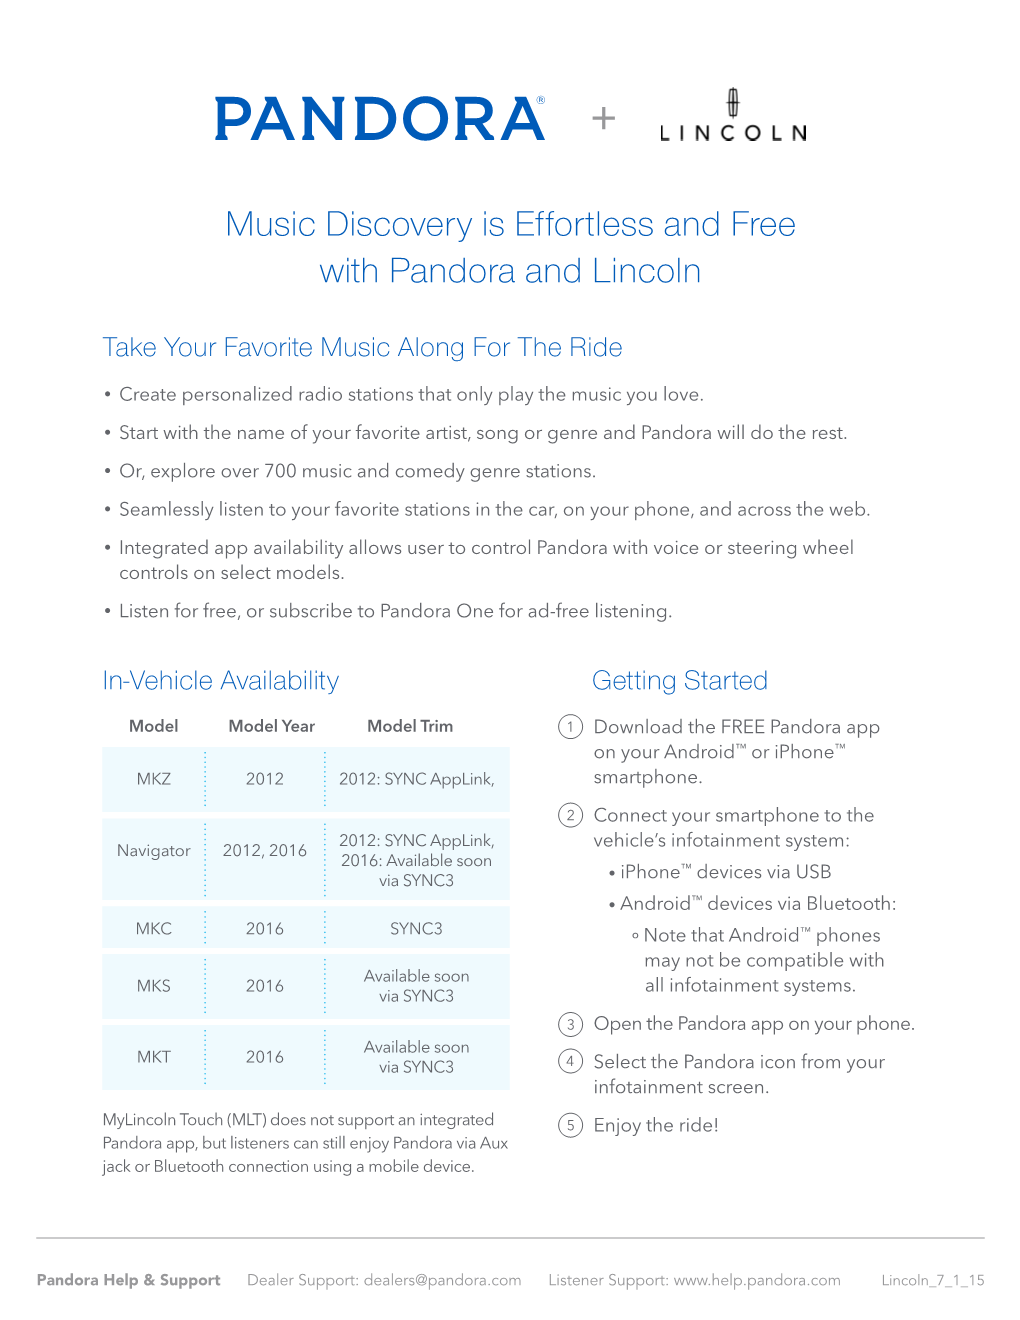 Music Discovery Is Effortless and Free with Pandora and Lincoln